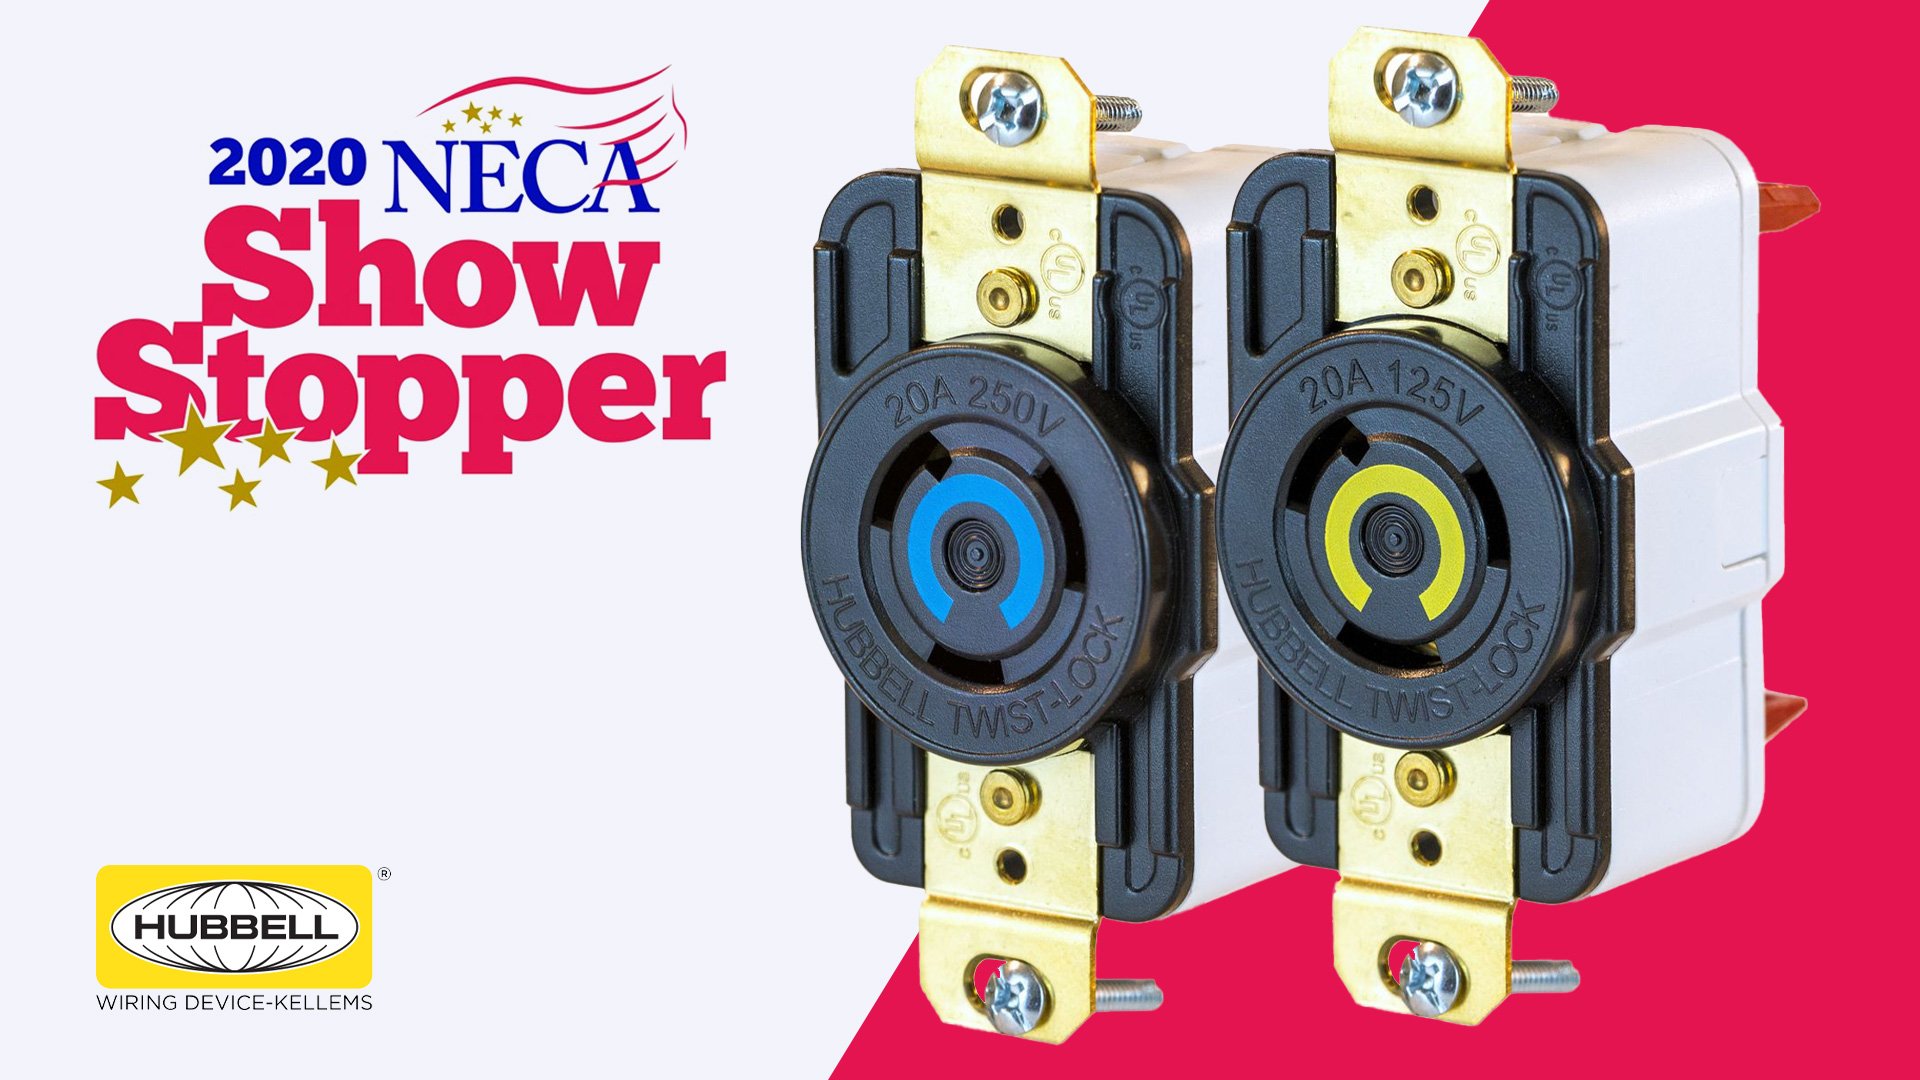 New Hubbell Twist-Lock spring-connect innovation recognized as NECA “Showstopper”